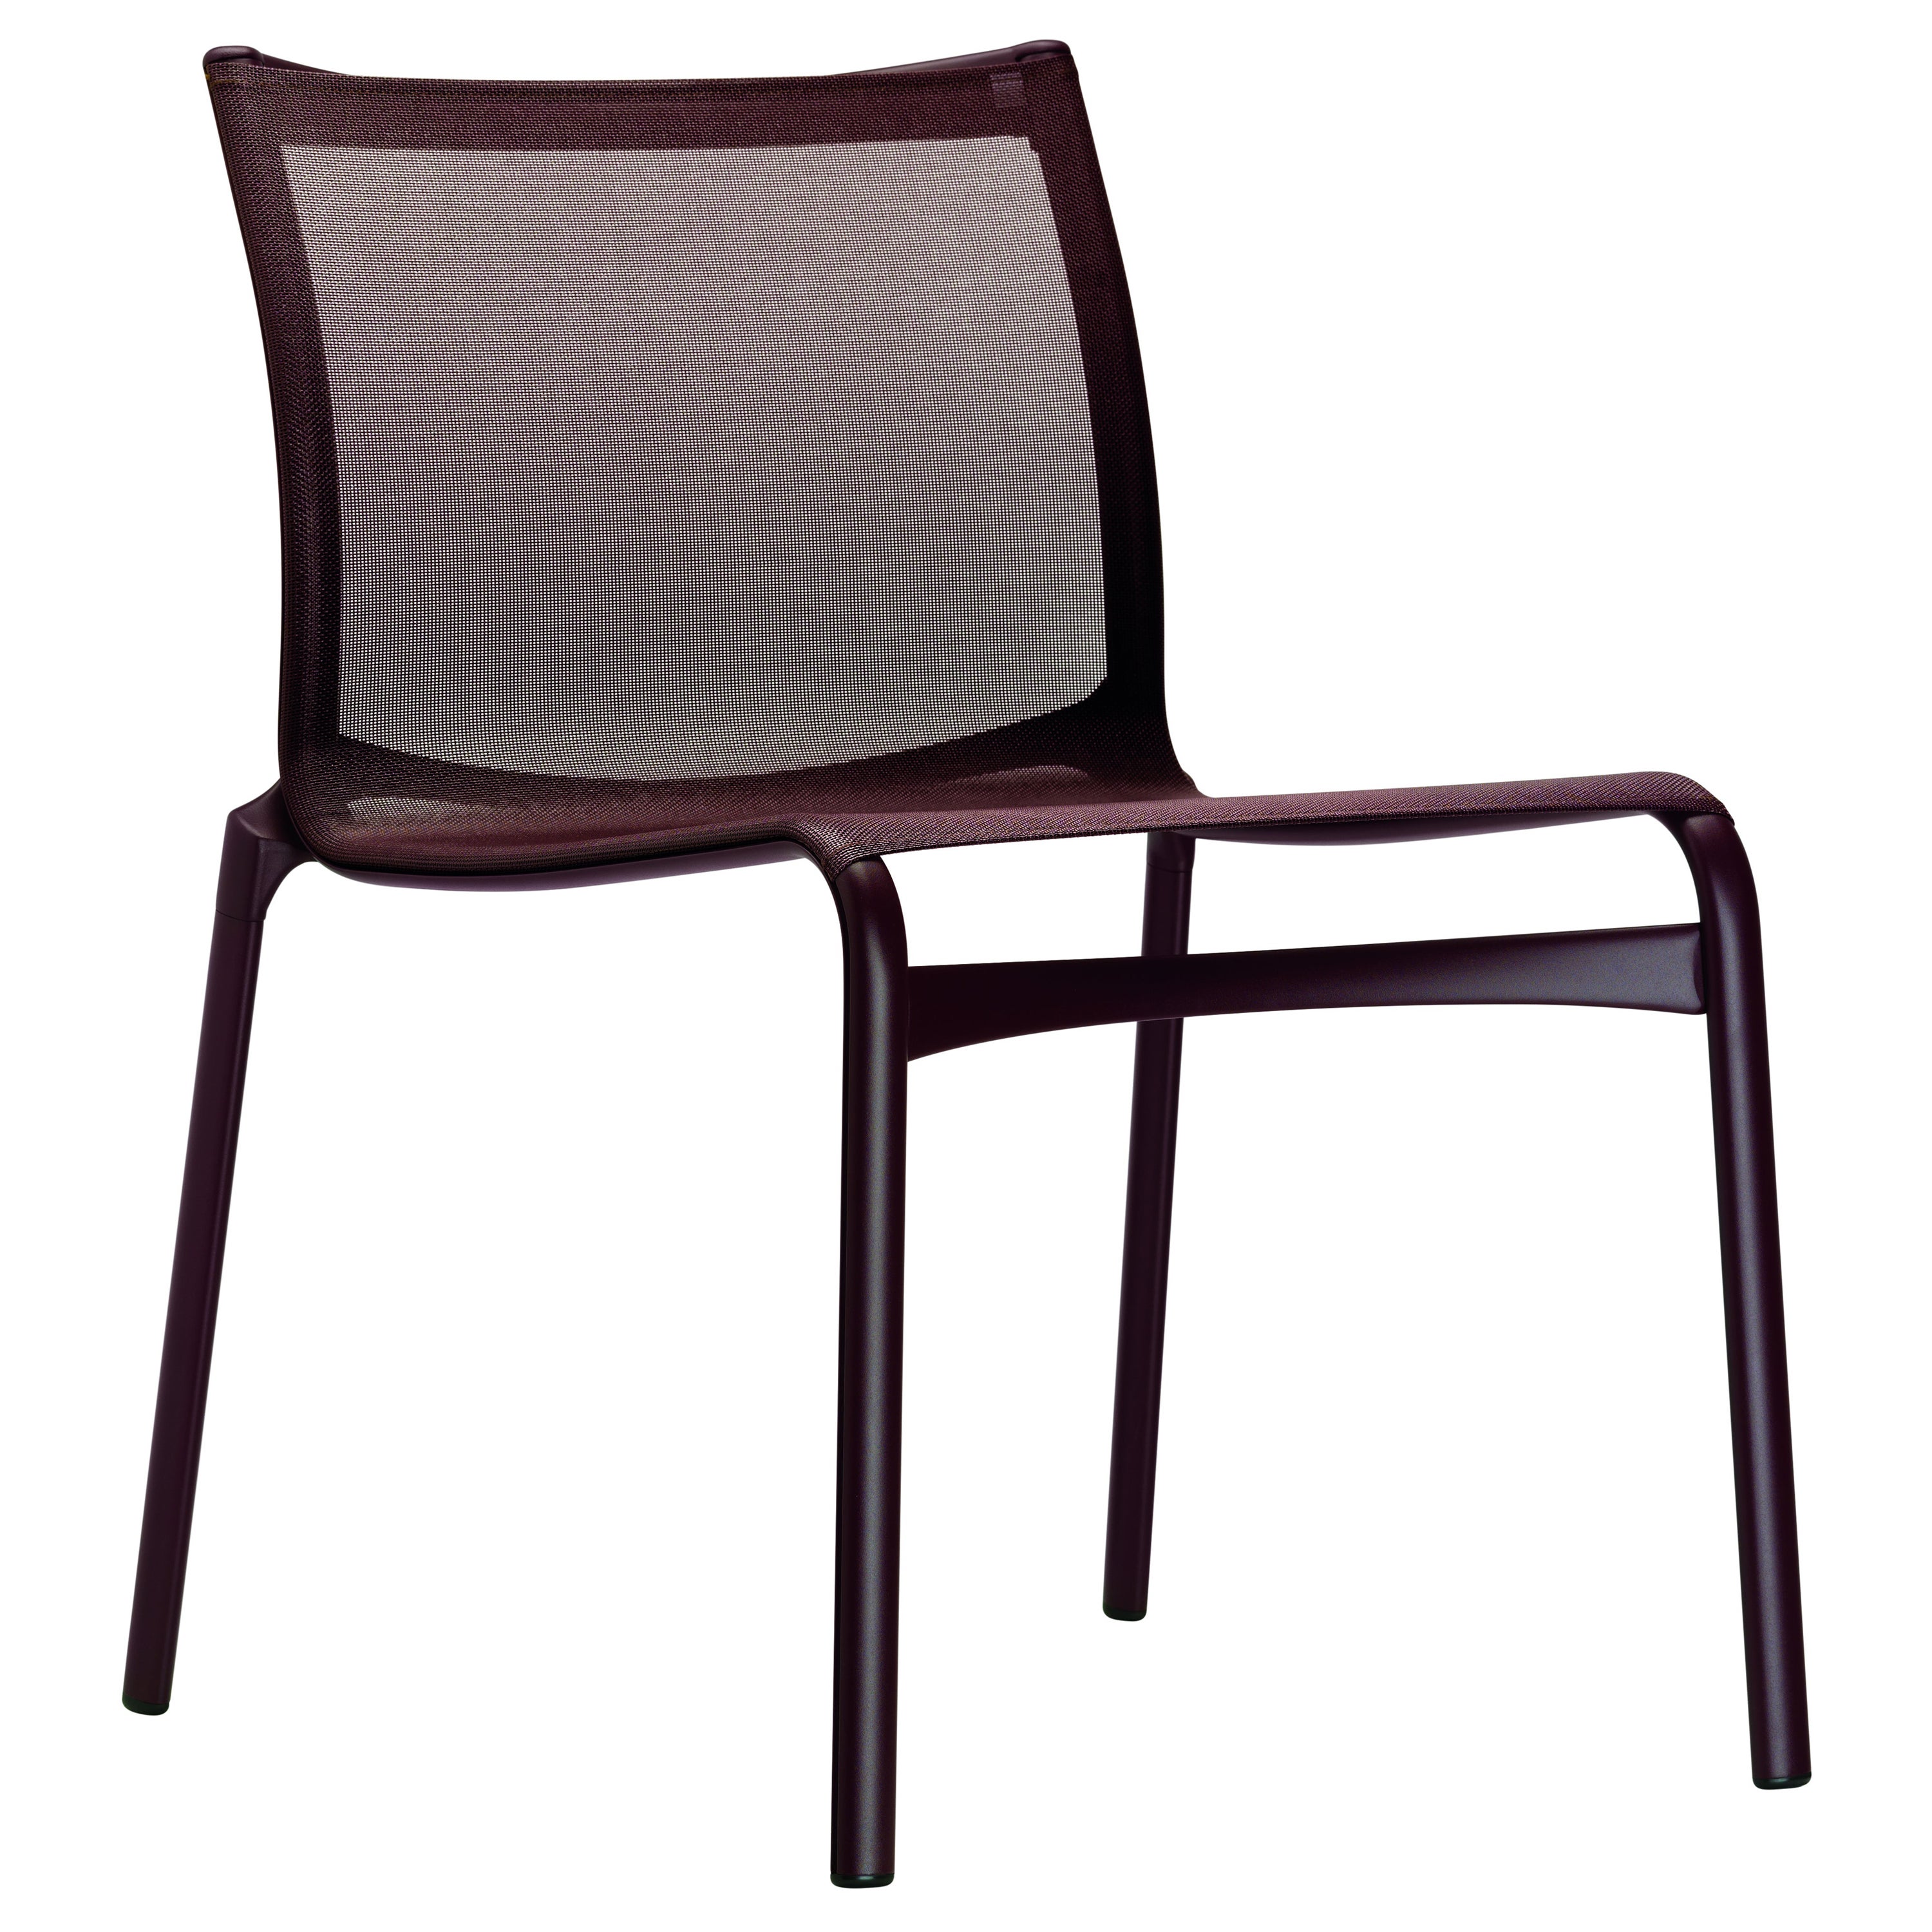 Alias Frame 52 Outdoor Chair in Aubergine Mesh Seat & Lacquered Aluminium Frame For Sale